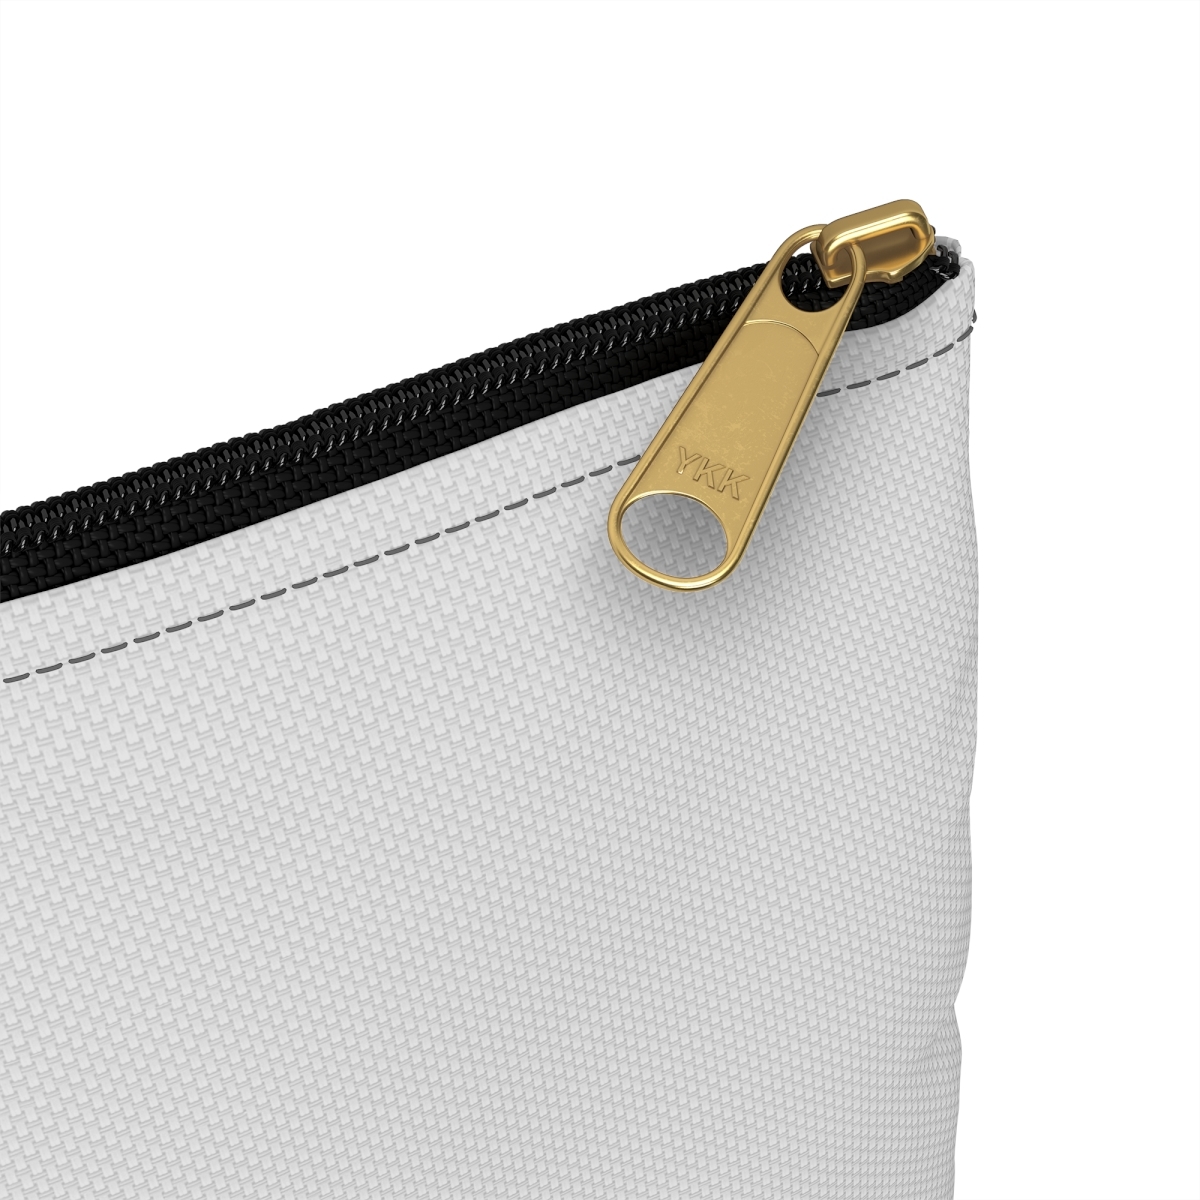 Primary image for Versatile Accessory Pouch: Durable, Zippered Storage for All Your Needs